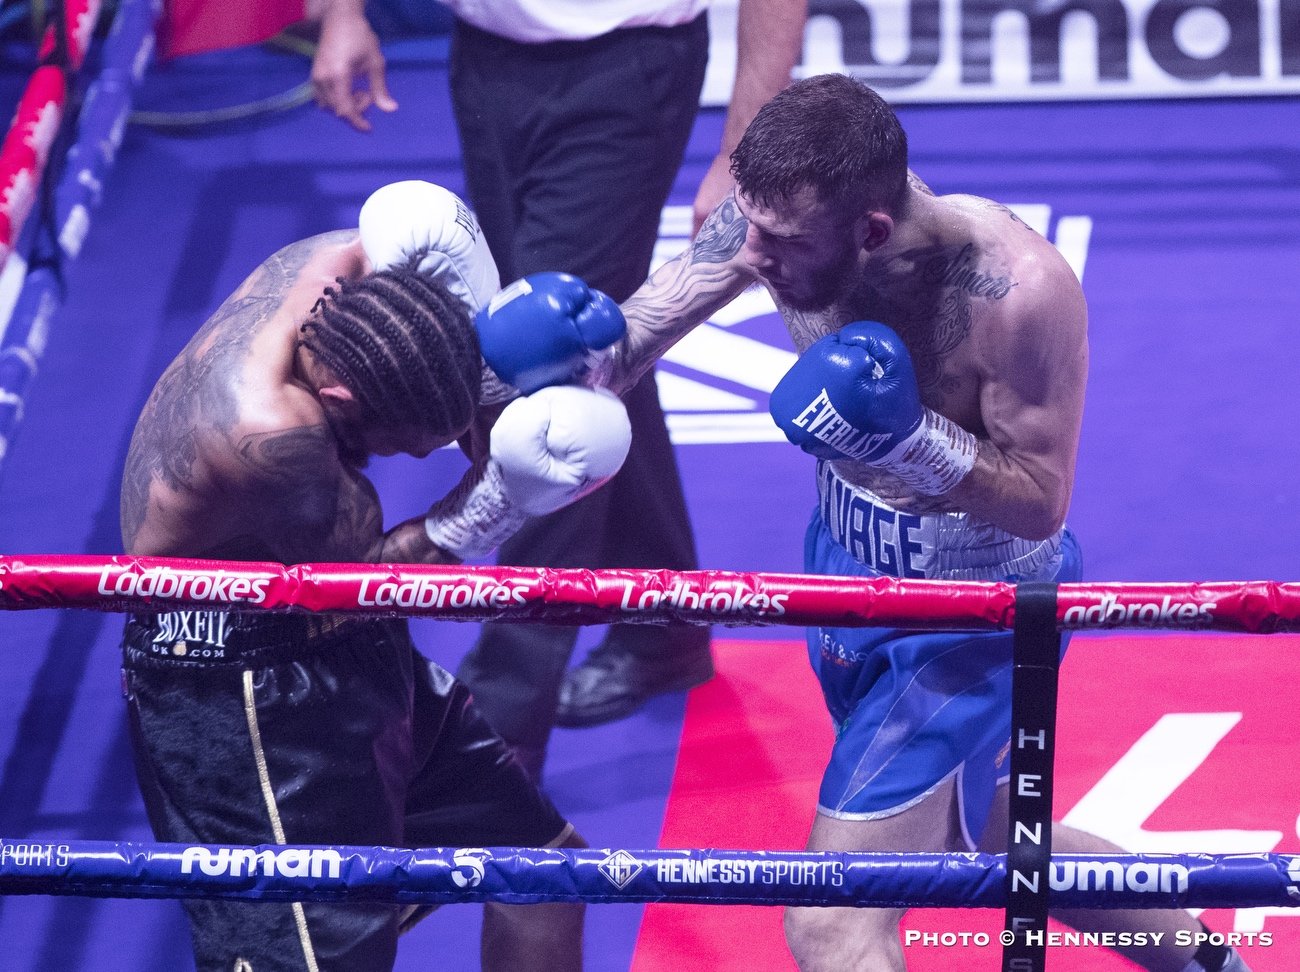 Sam Eggington stops Ashley Theophane in 6th round - Boxing Results